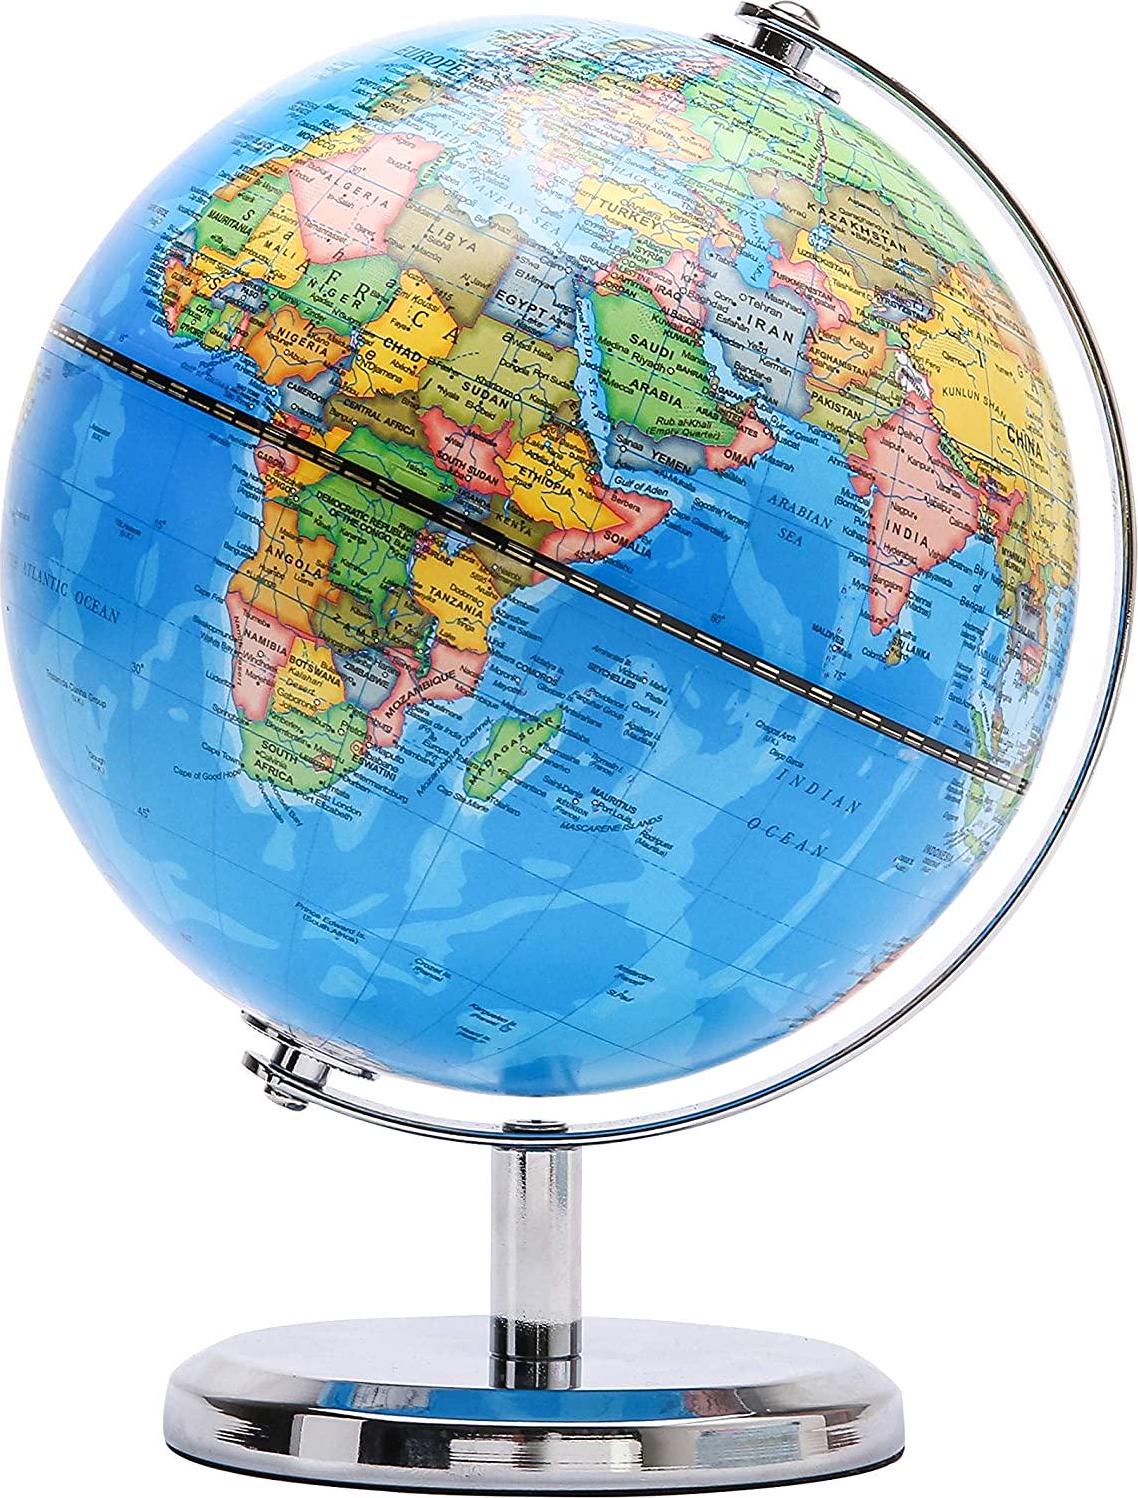 Exerz, Exerz 20cm World Globe - Educational/Geographic/Modern Desktop Decoration - Stainless Steel Arc and Base - for School, Home, and Office (20cm Blue Political)